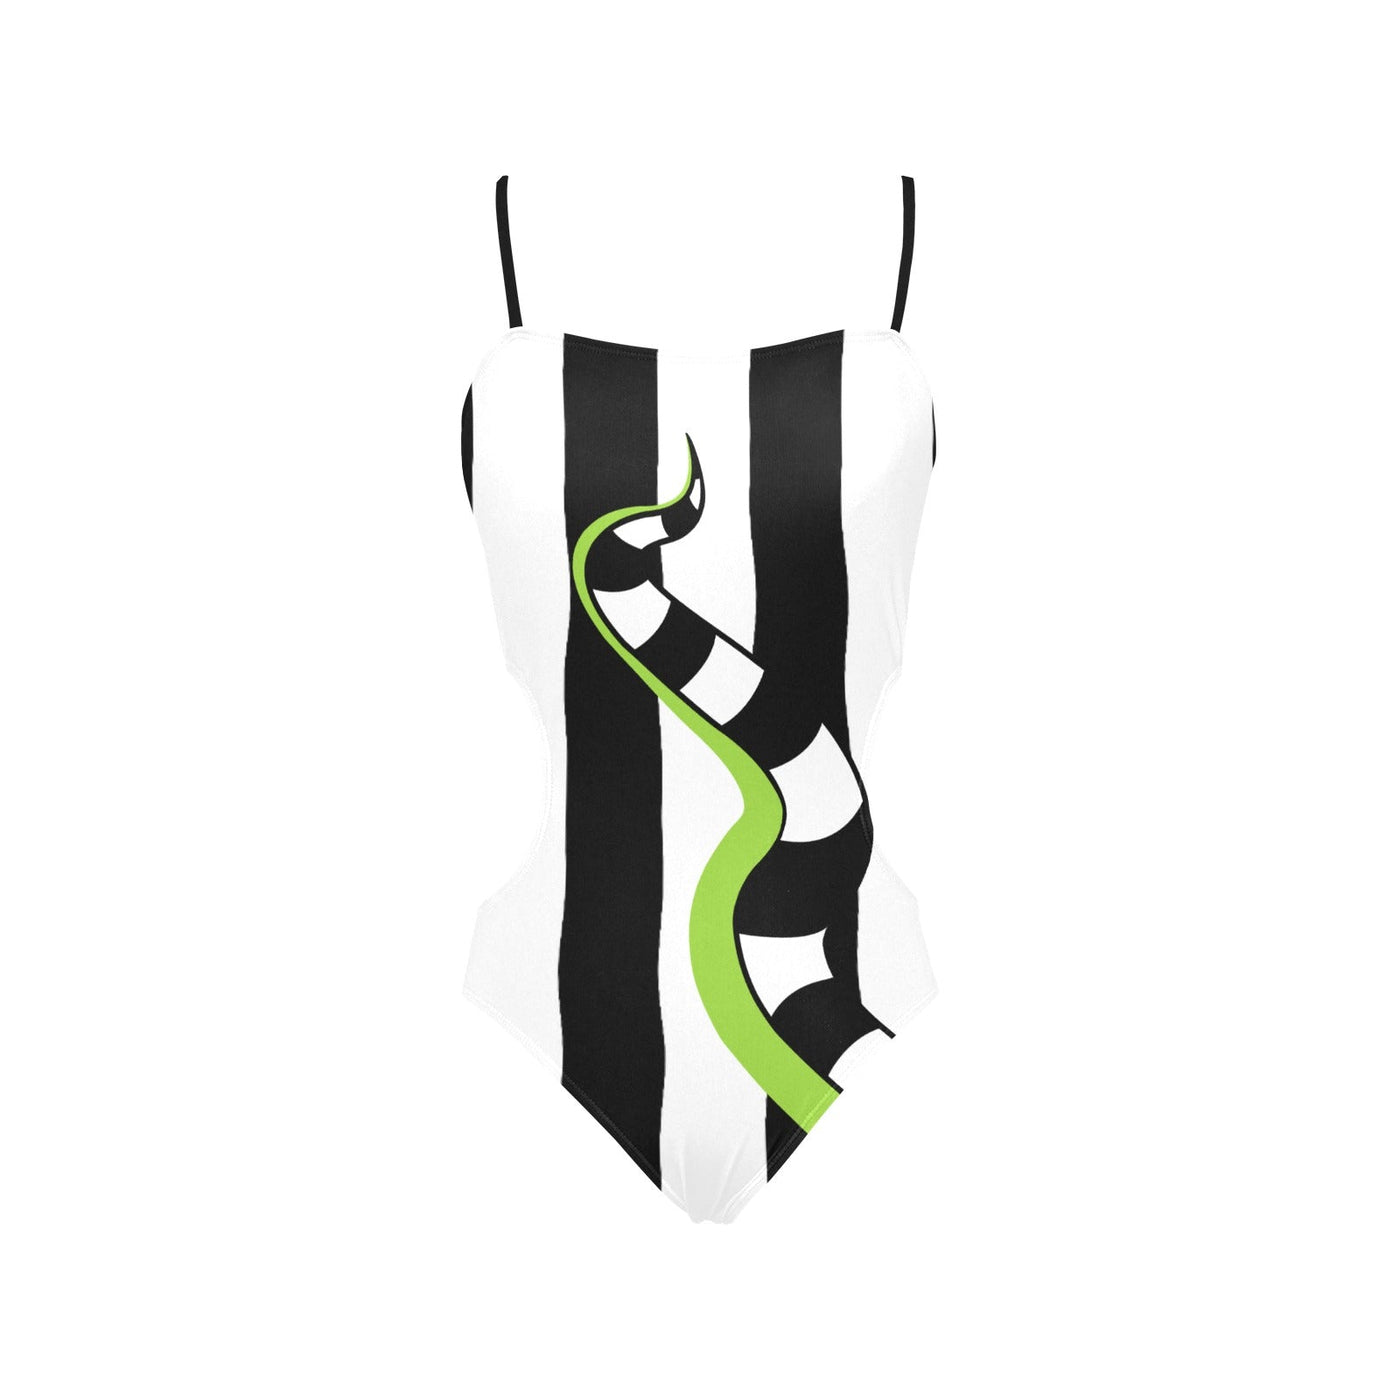 Beetlejuice & Sandworm One Piece Body Swimsuit with Thin Straps